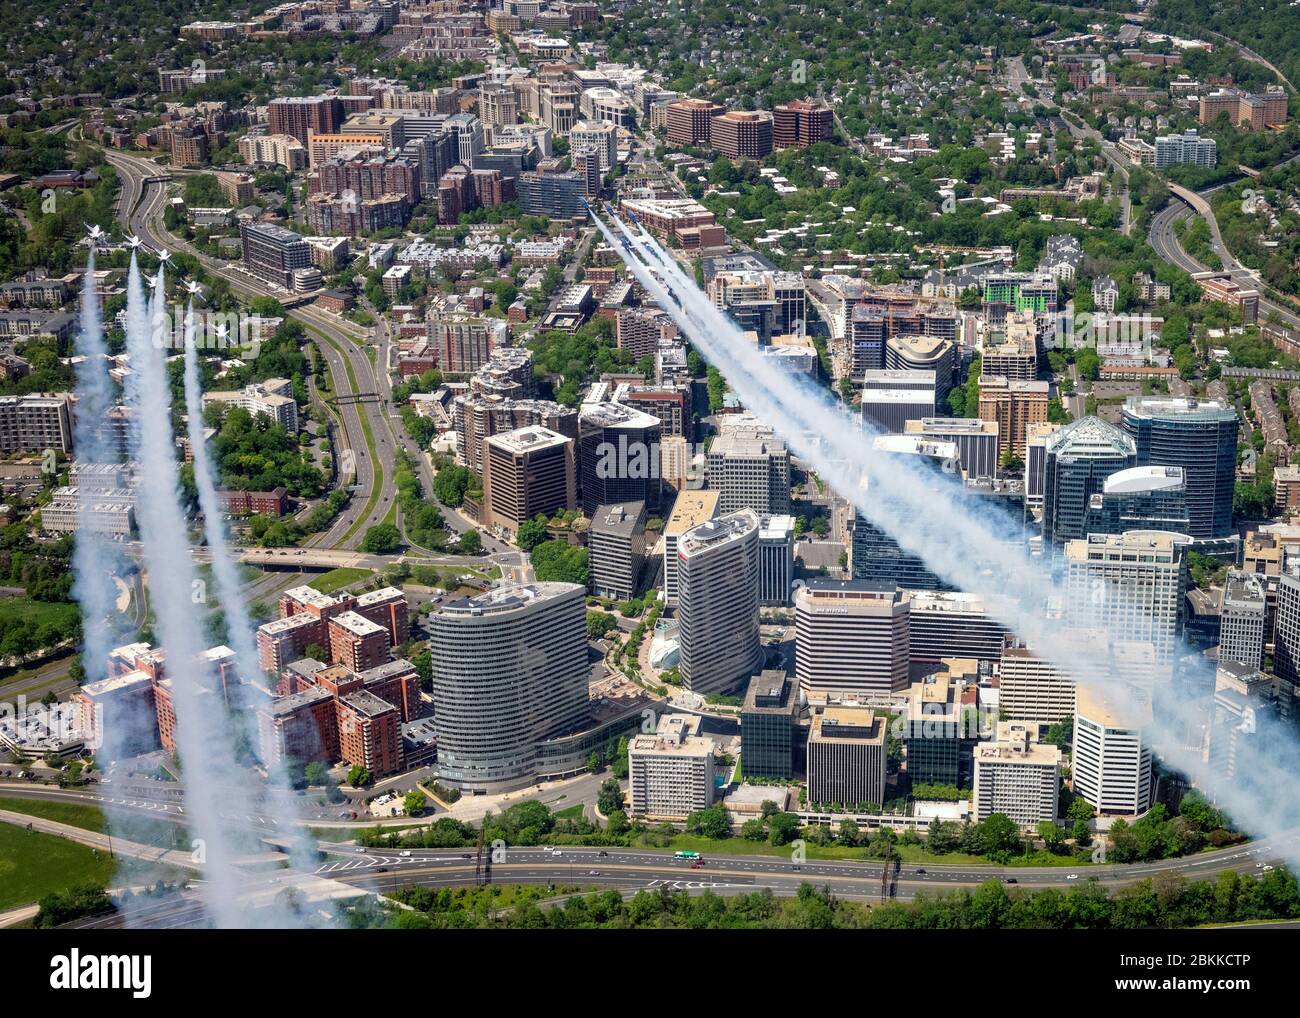 The U.S. Air Force Air Demonstration Squadron, the Thunderbirds, and the Navy Blue Angels, right, fly in formation over Rosslyn, during the America Strong flyover May 2, 2020 in Arlington, Virginia. America Strong is a salute from the Navy and Air Force to recognize healthcare workers, first responders, and other essential personnel in a show of national solidarity during the COVID-19 pandemic. Stock Photo